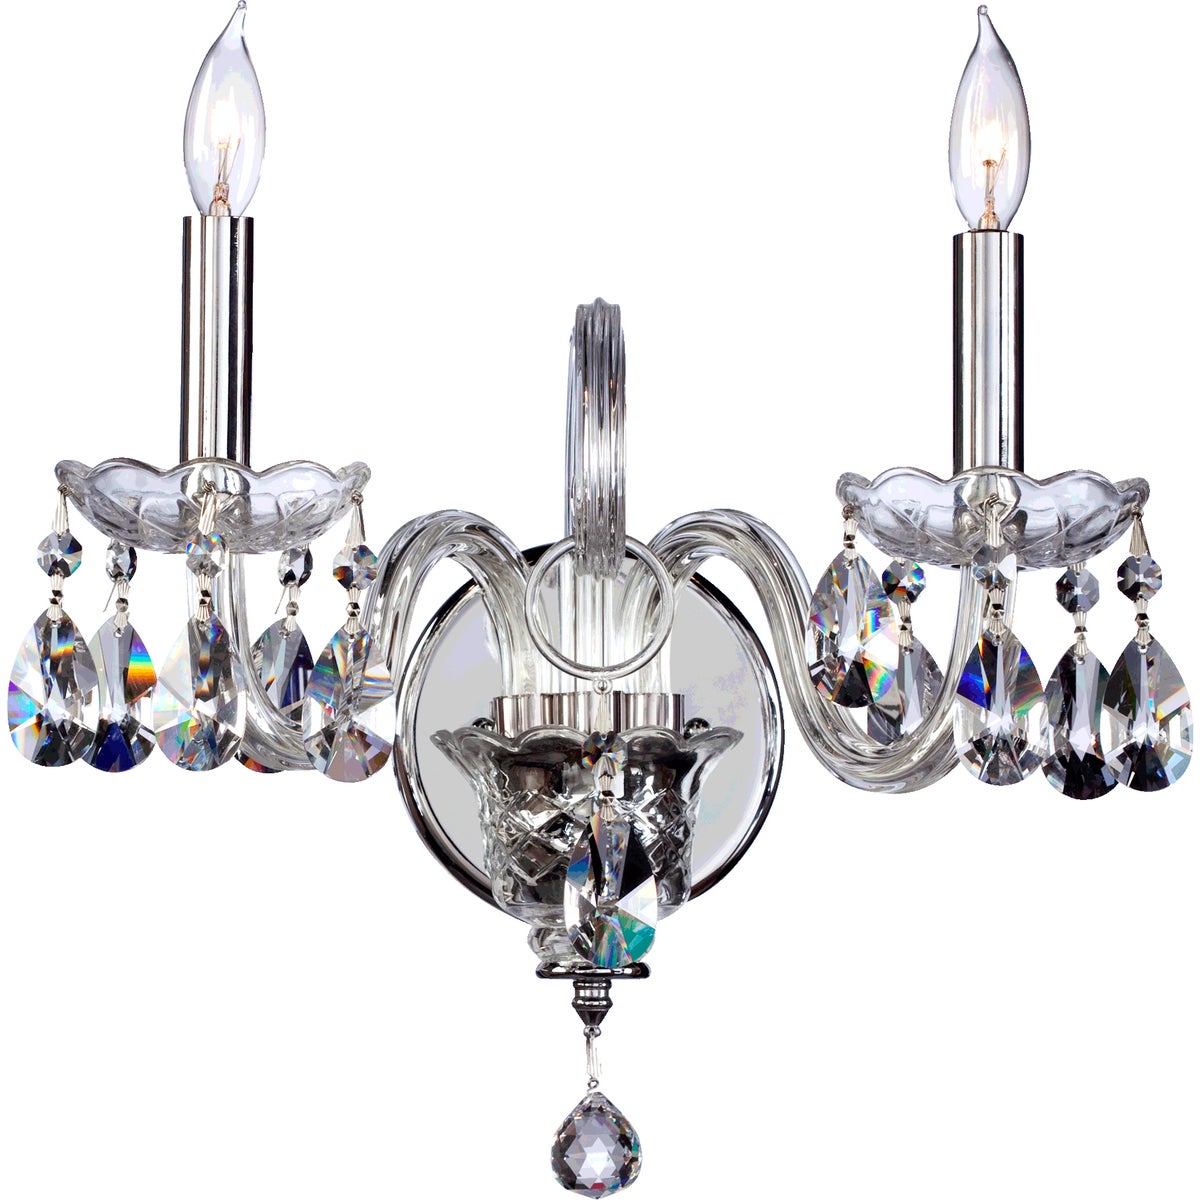 Crystal Wall Sconce with two lights, featuring tear drop crystal accents for dazzling, prismatic effects. Chrome finish.